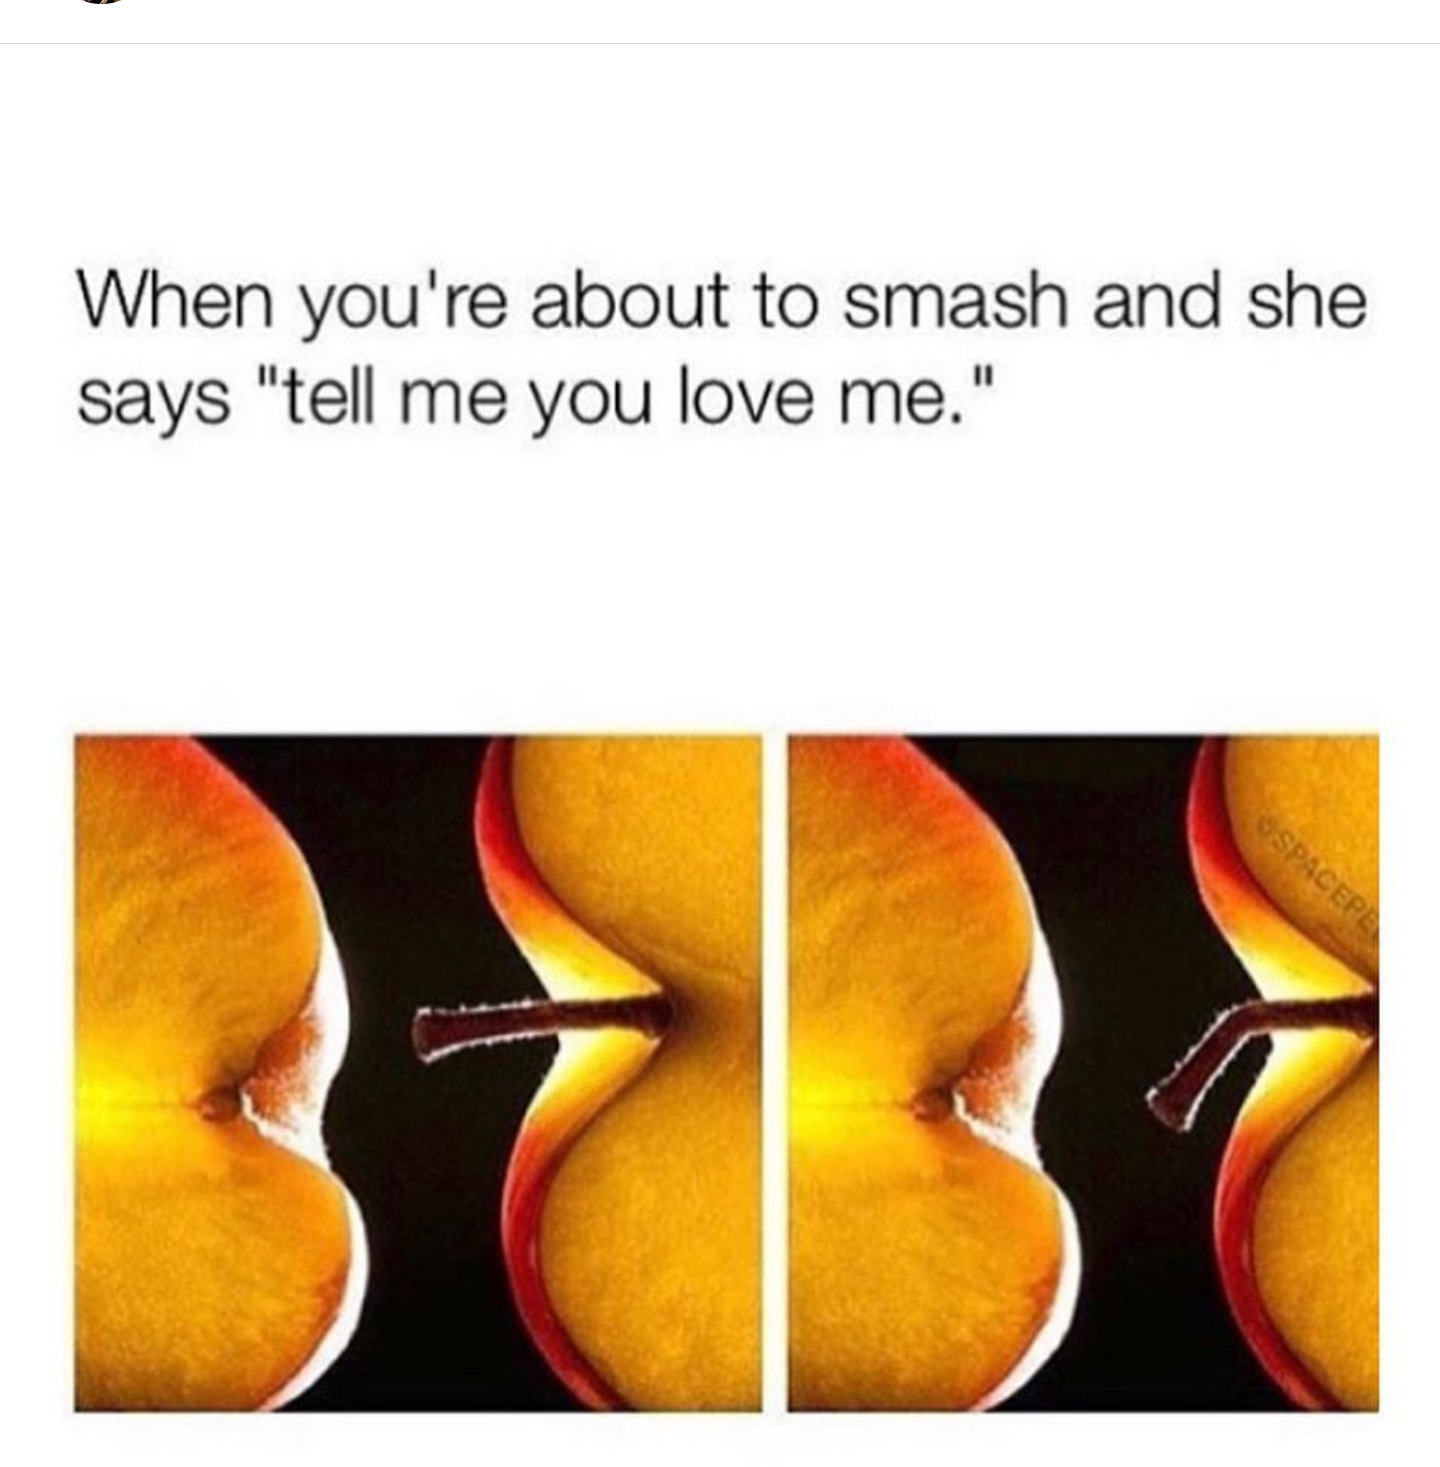 sex memes - When you're about to smash and she says "tell me you love me." Spacepe